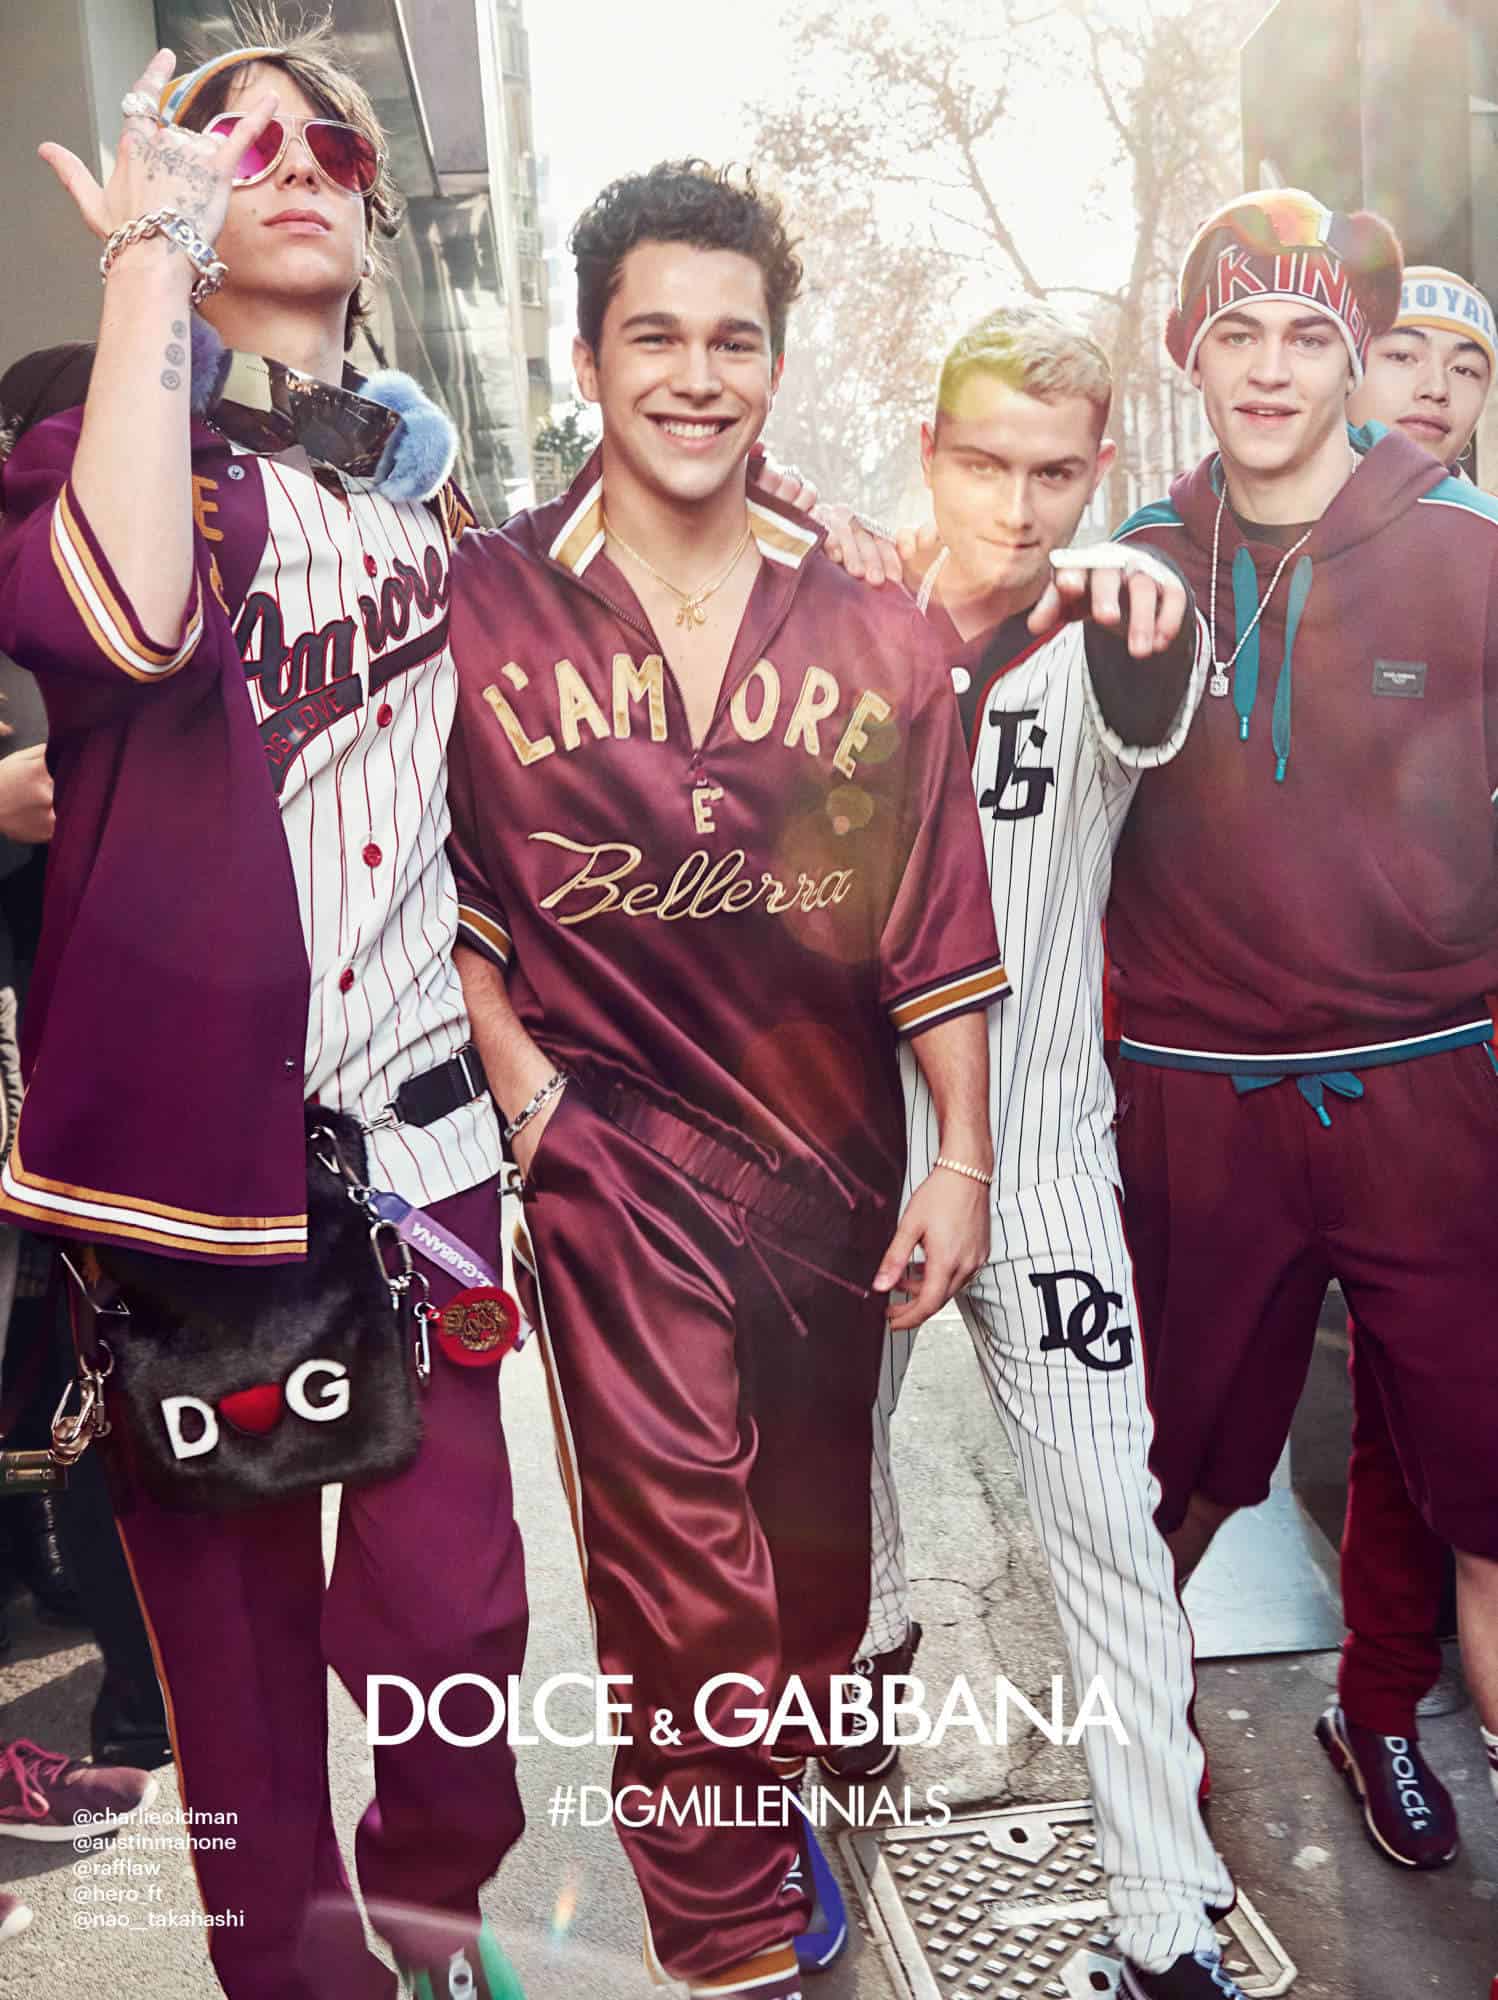 Dolce & Gabbana Hits The Hamptons with Traveling Pop-Up – Nobleman